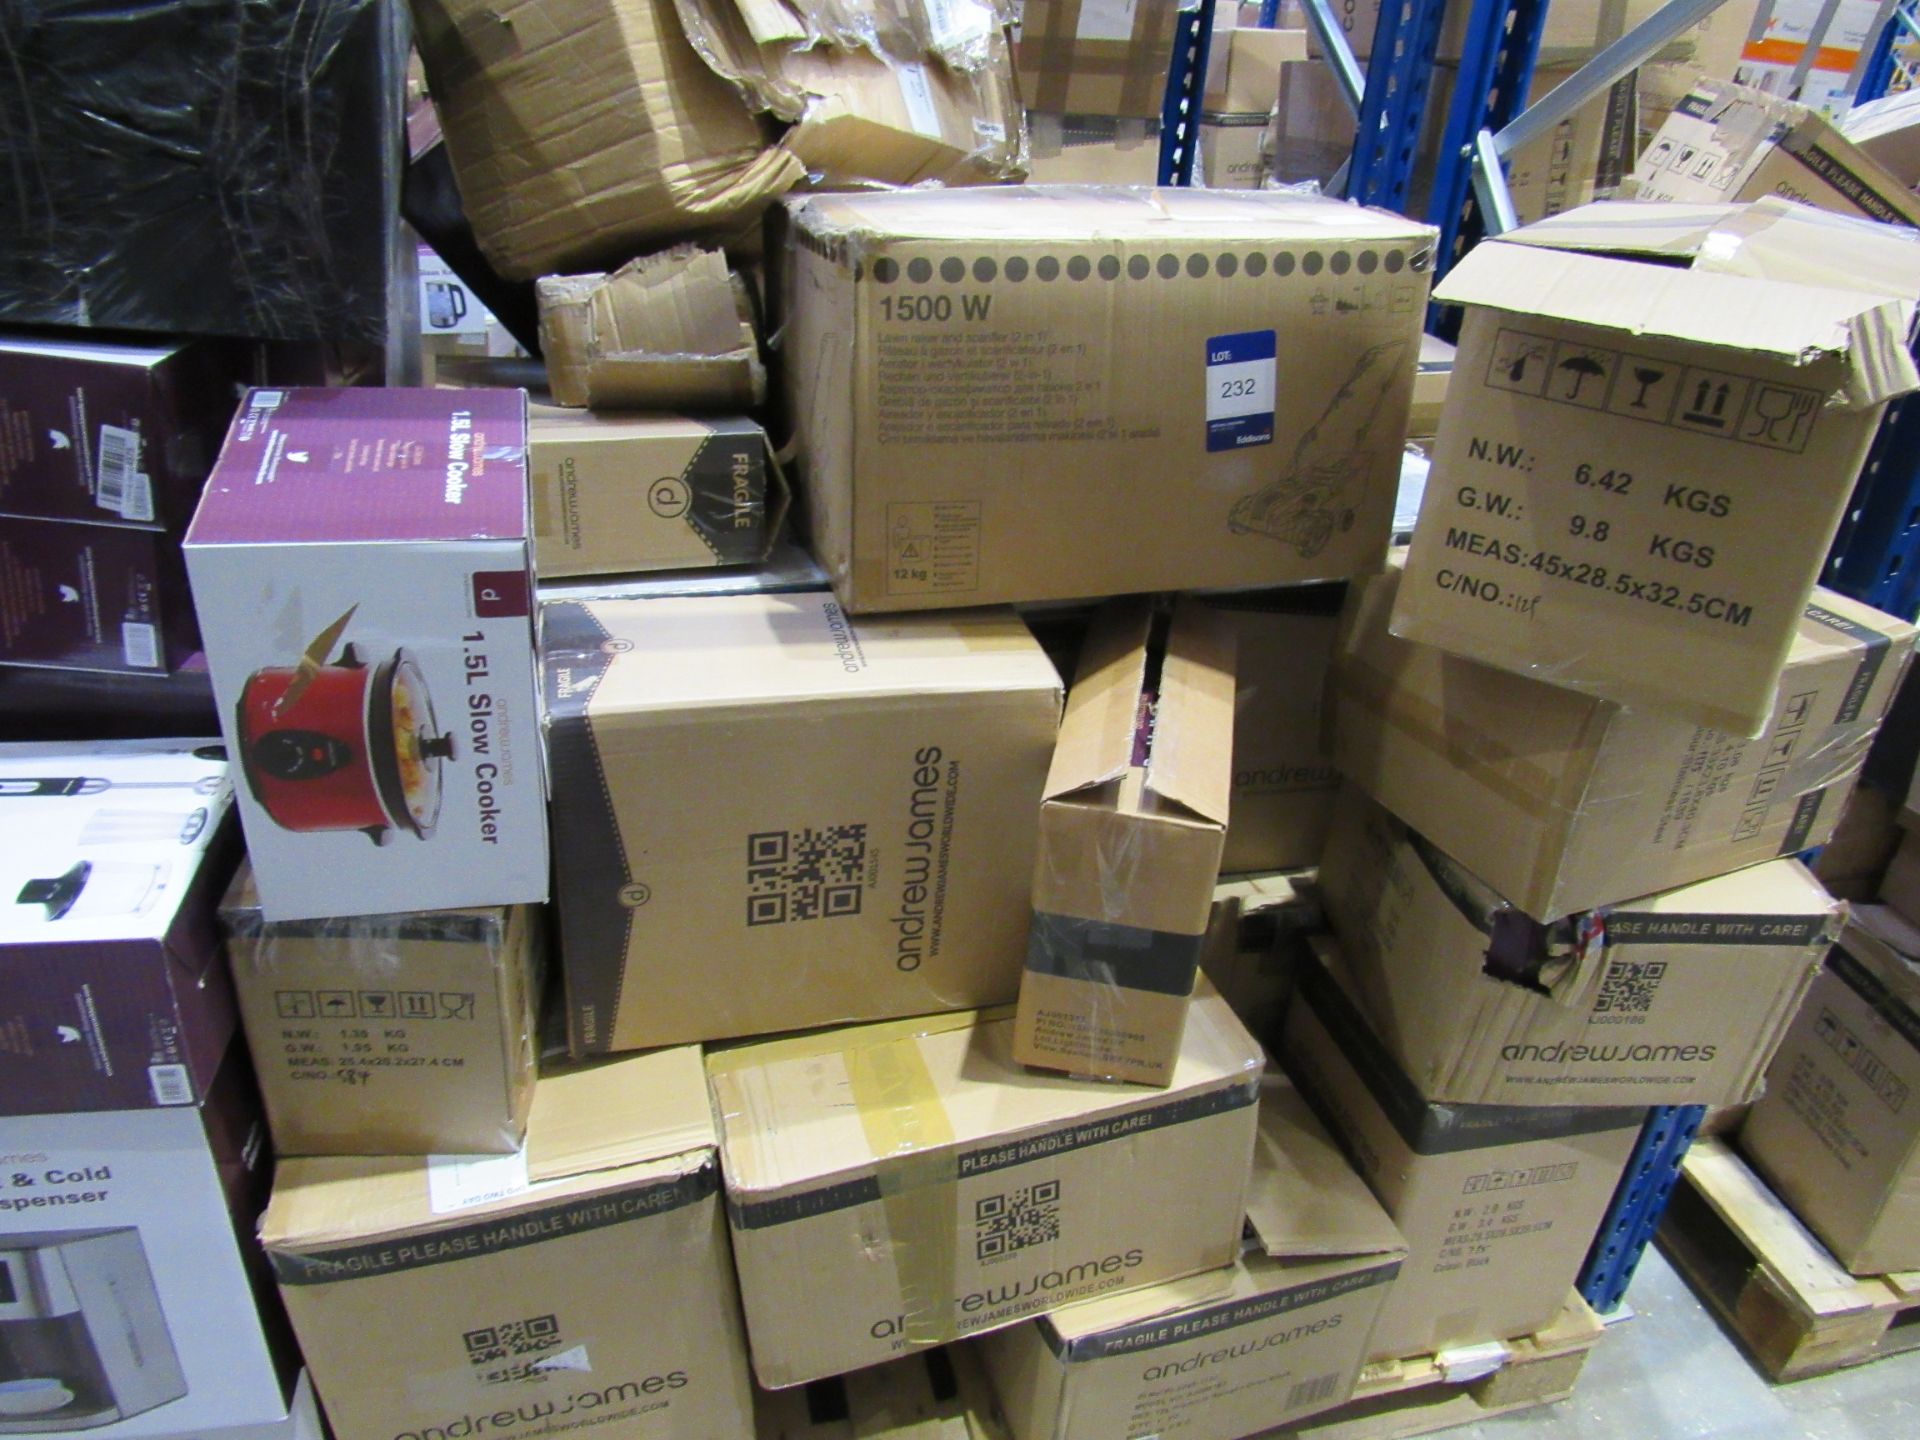 Quantity of Customer Returns to Pallet, items not